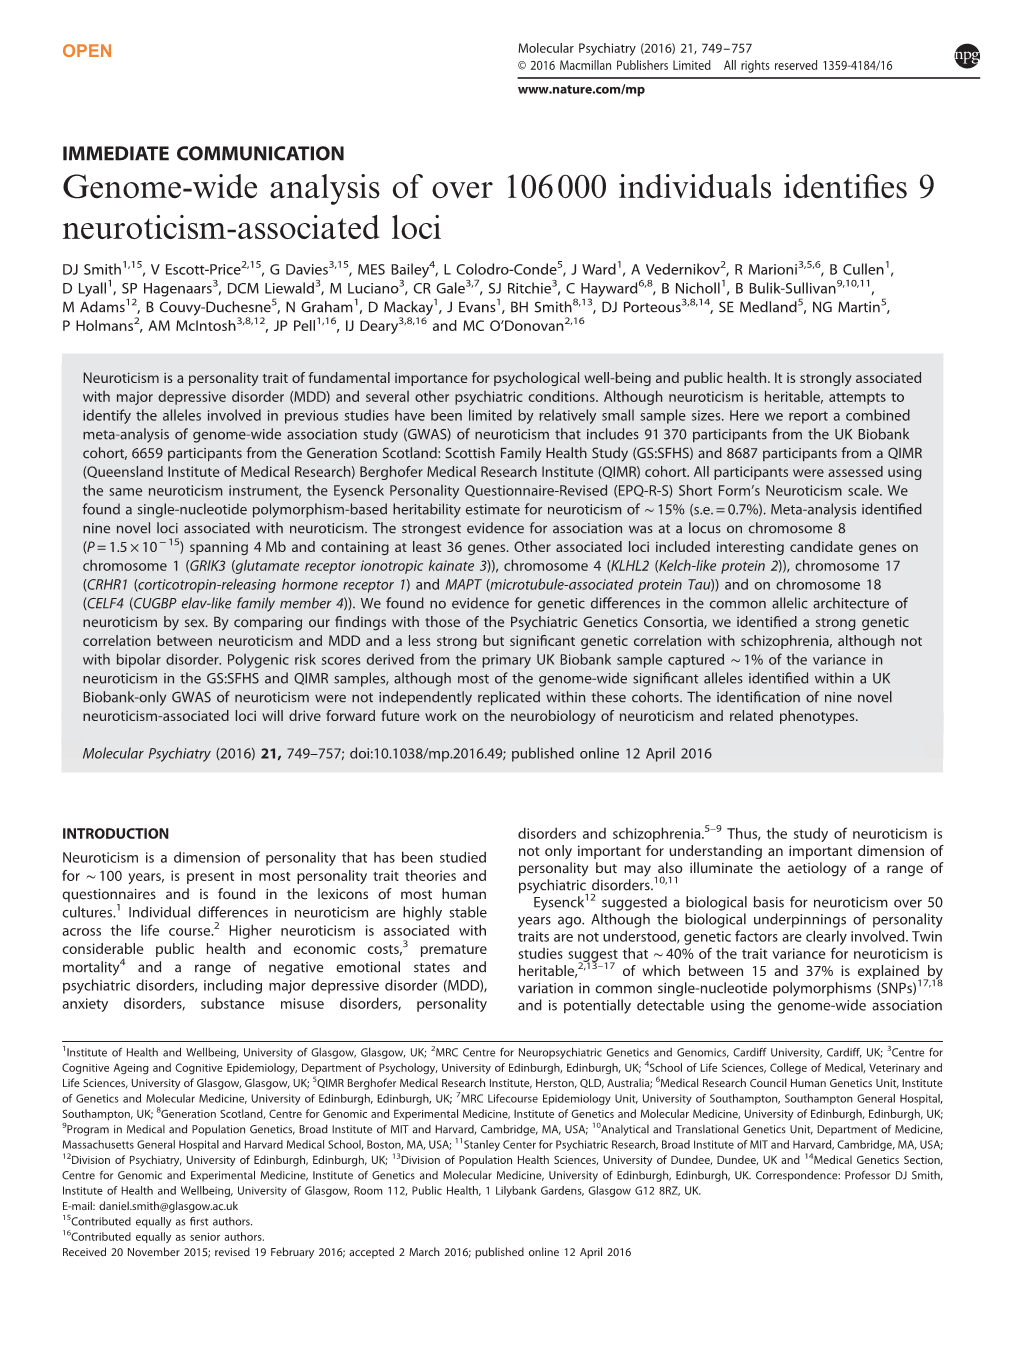 Genome-Wide Analysis of Over 106&Thinsp